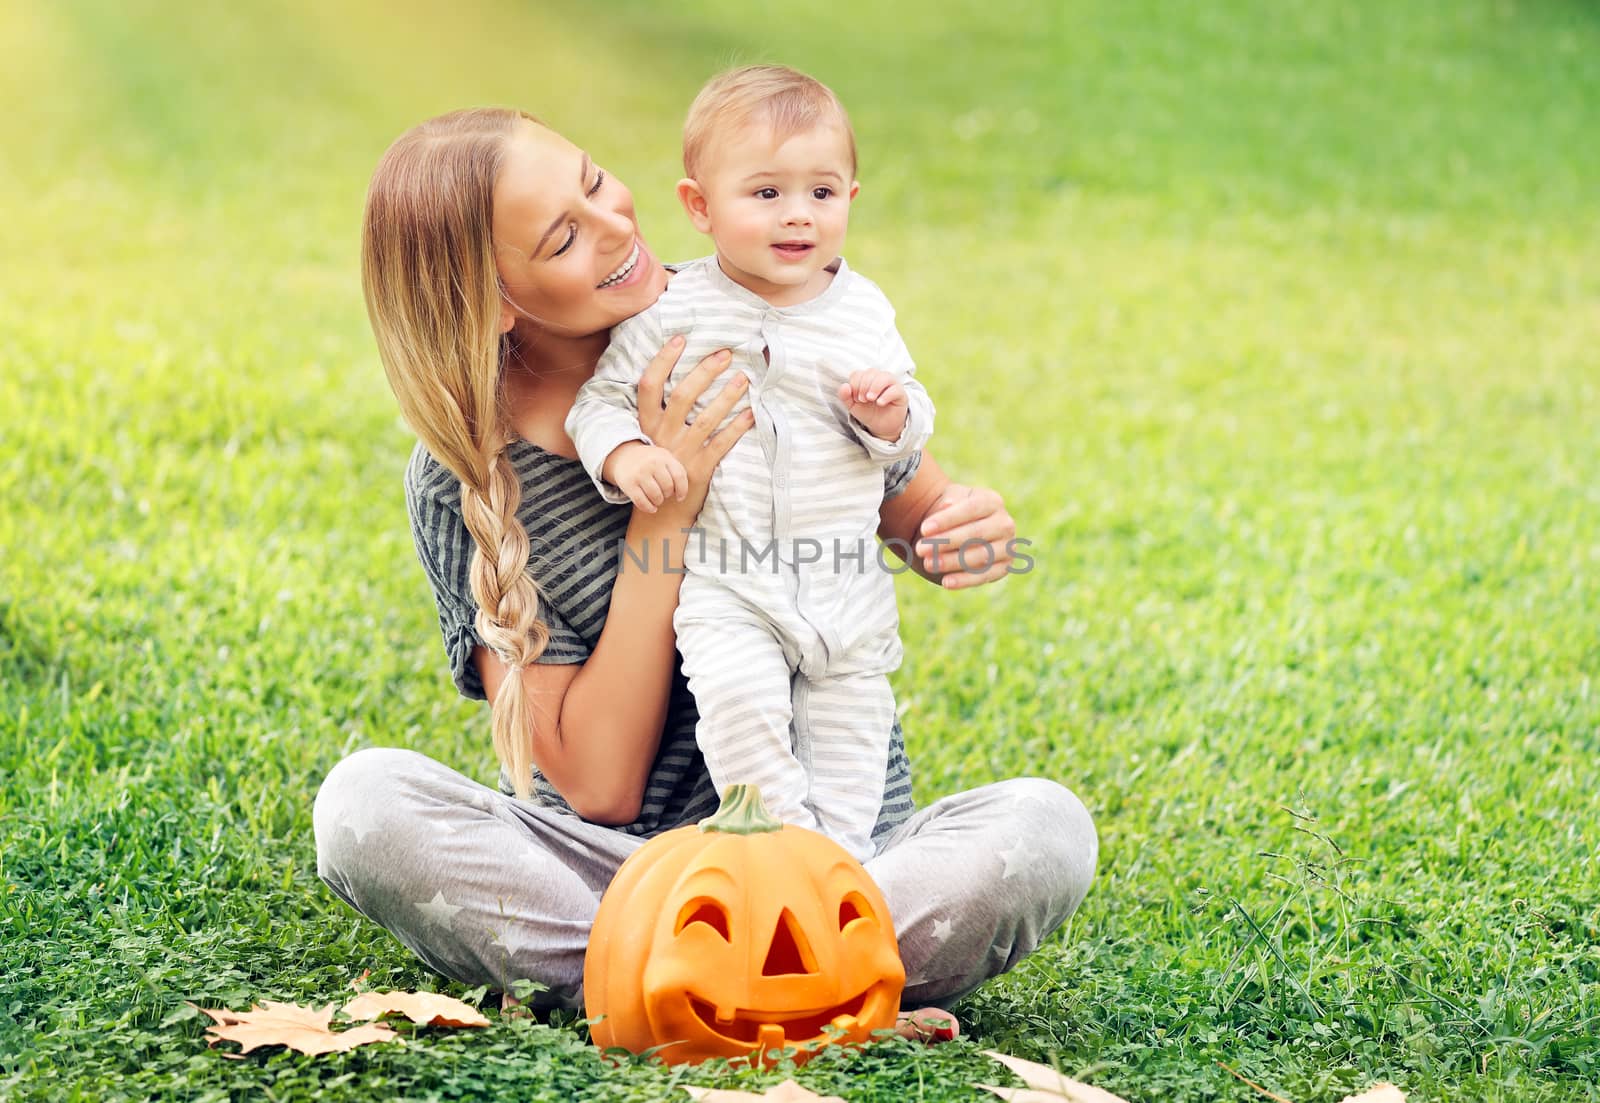 Mother and baby enjoying Halloween by Anna_Omelchenko